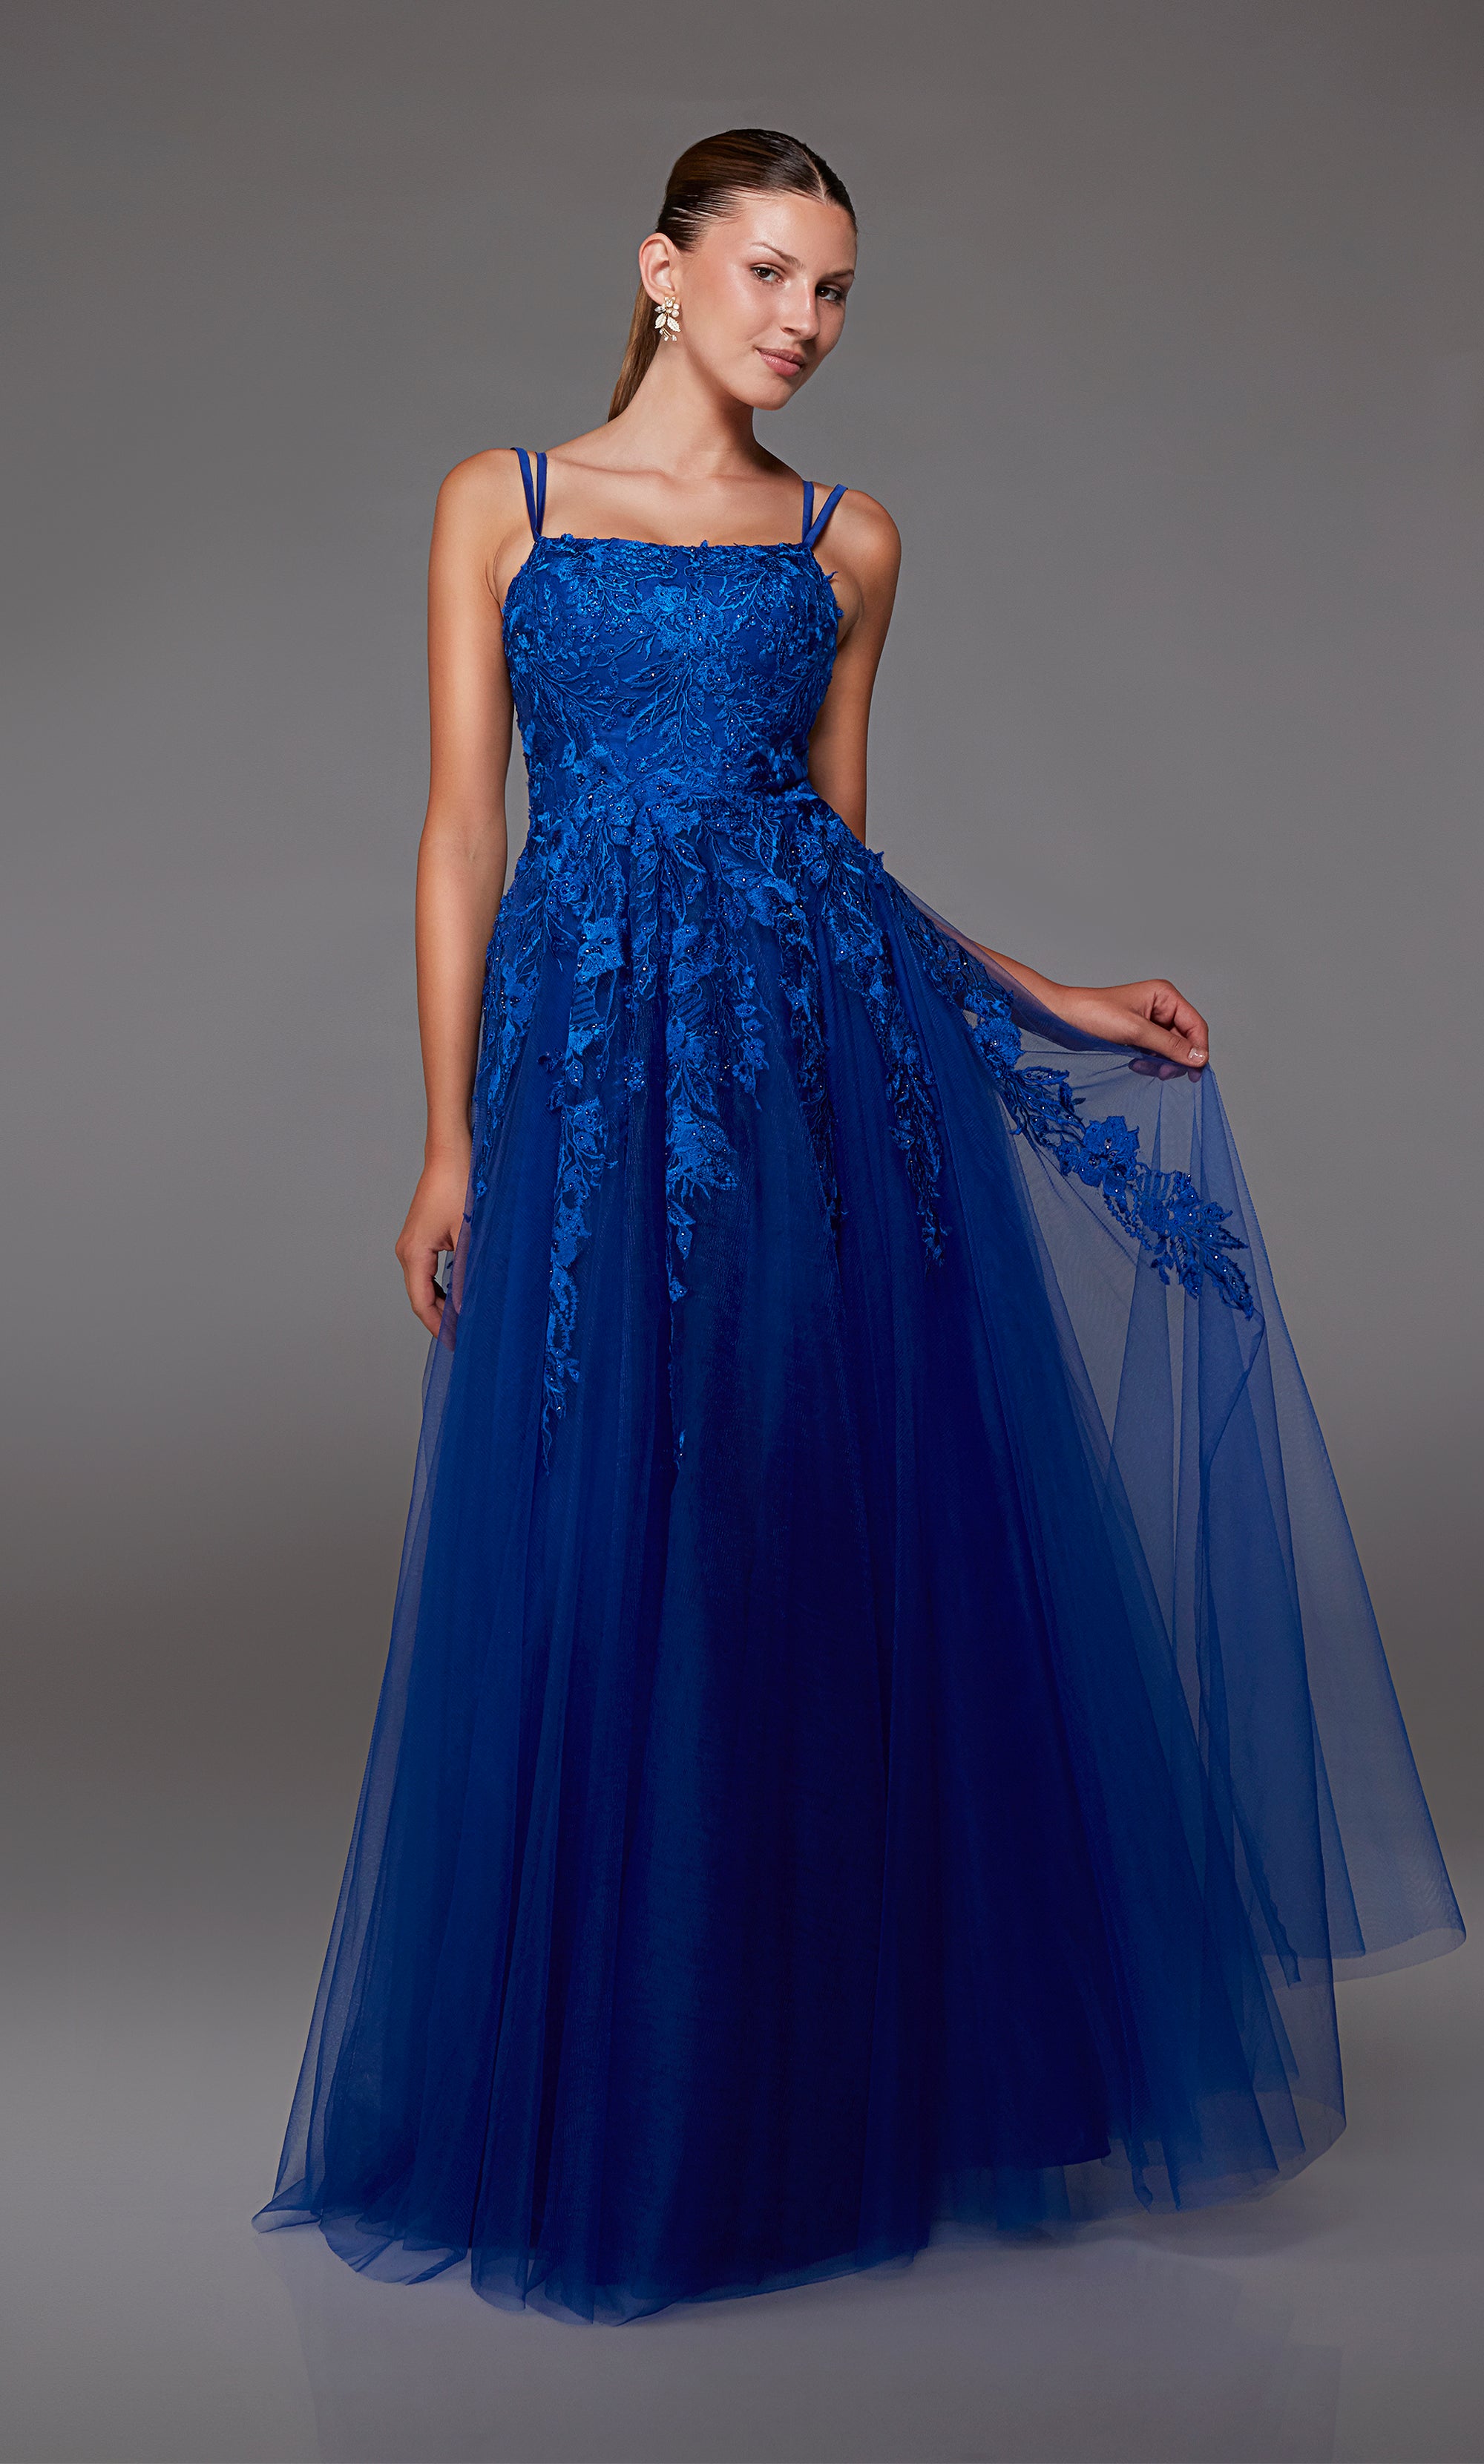 Shiny Royal Blue Sequin Long Sleeves Sheer Mermaid Prom Gown